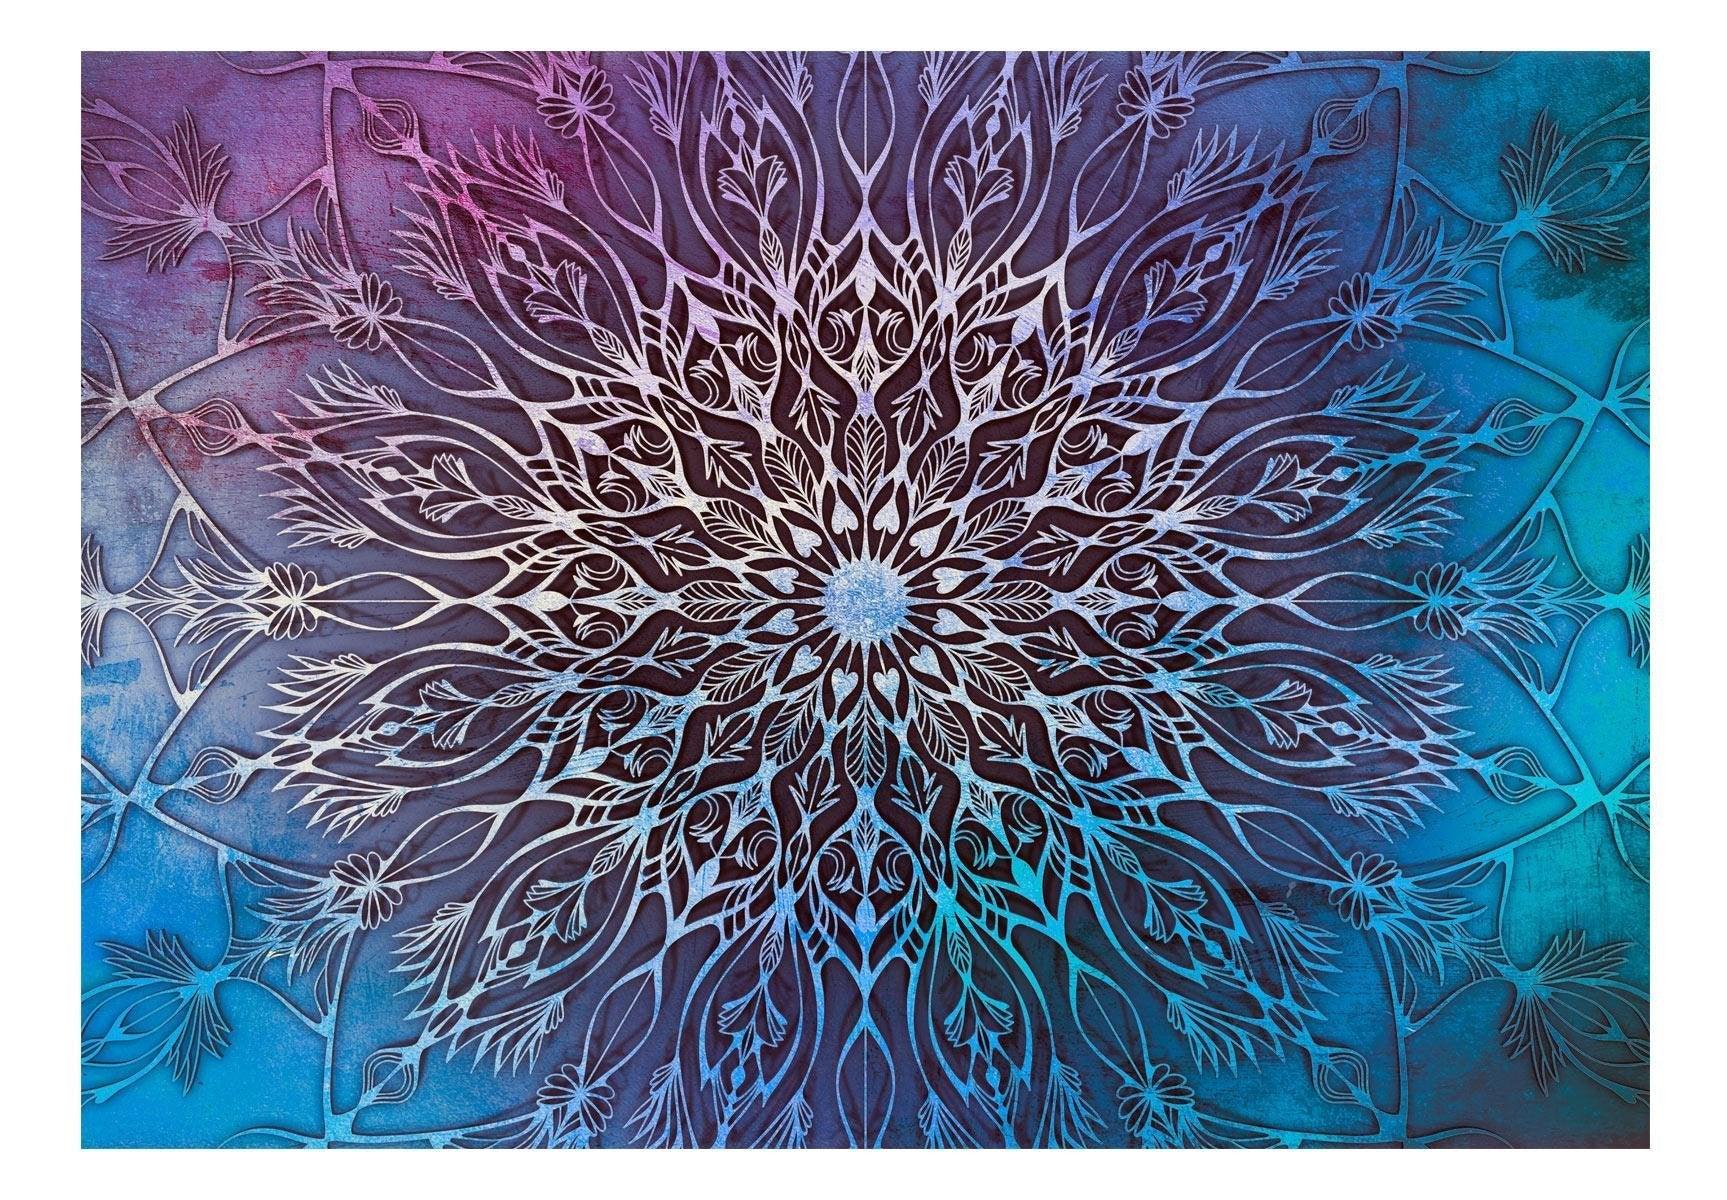 Peel and stick wall mural - Center (Blue) - www.trendingbestsellers.com